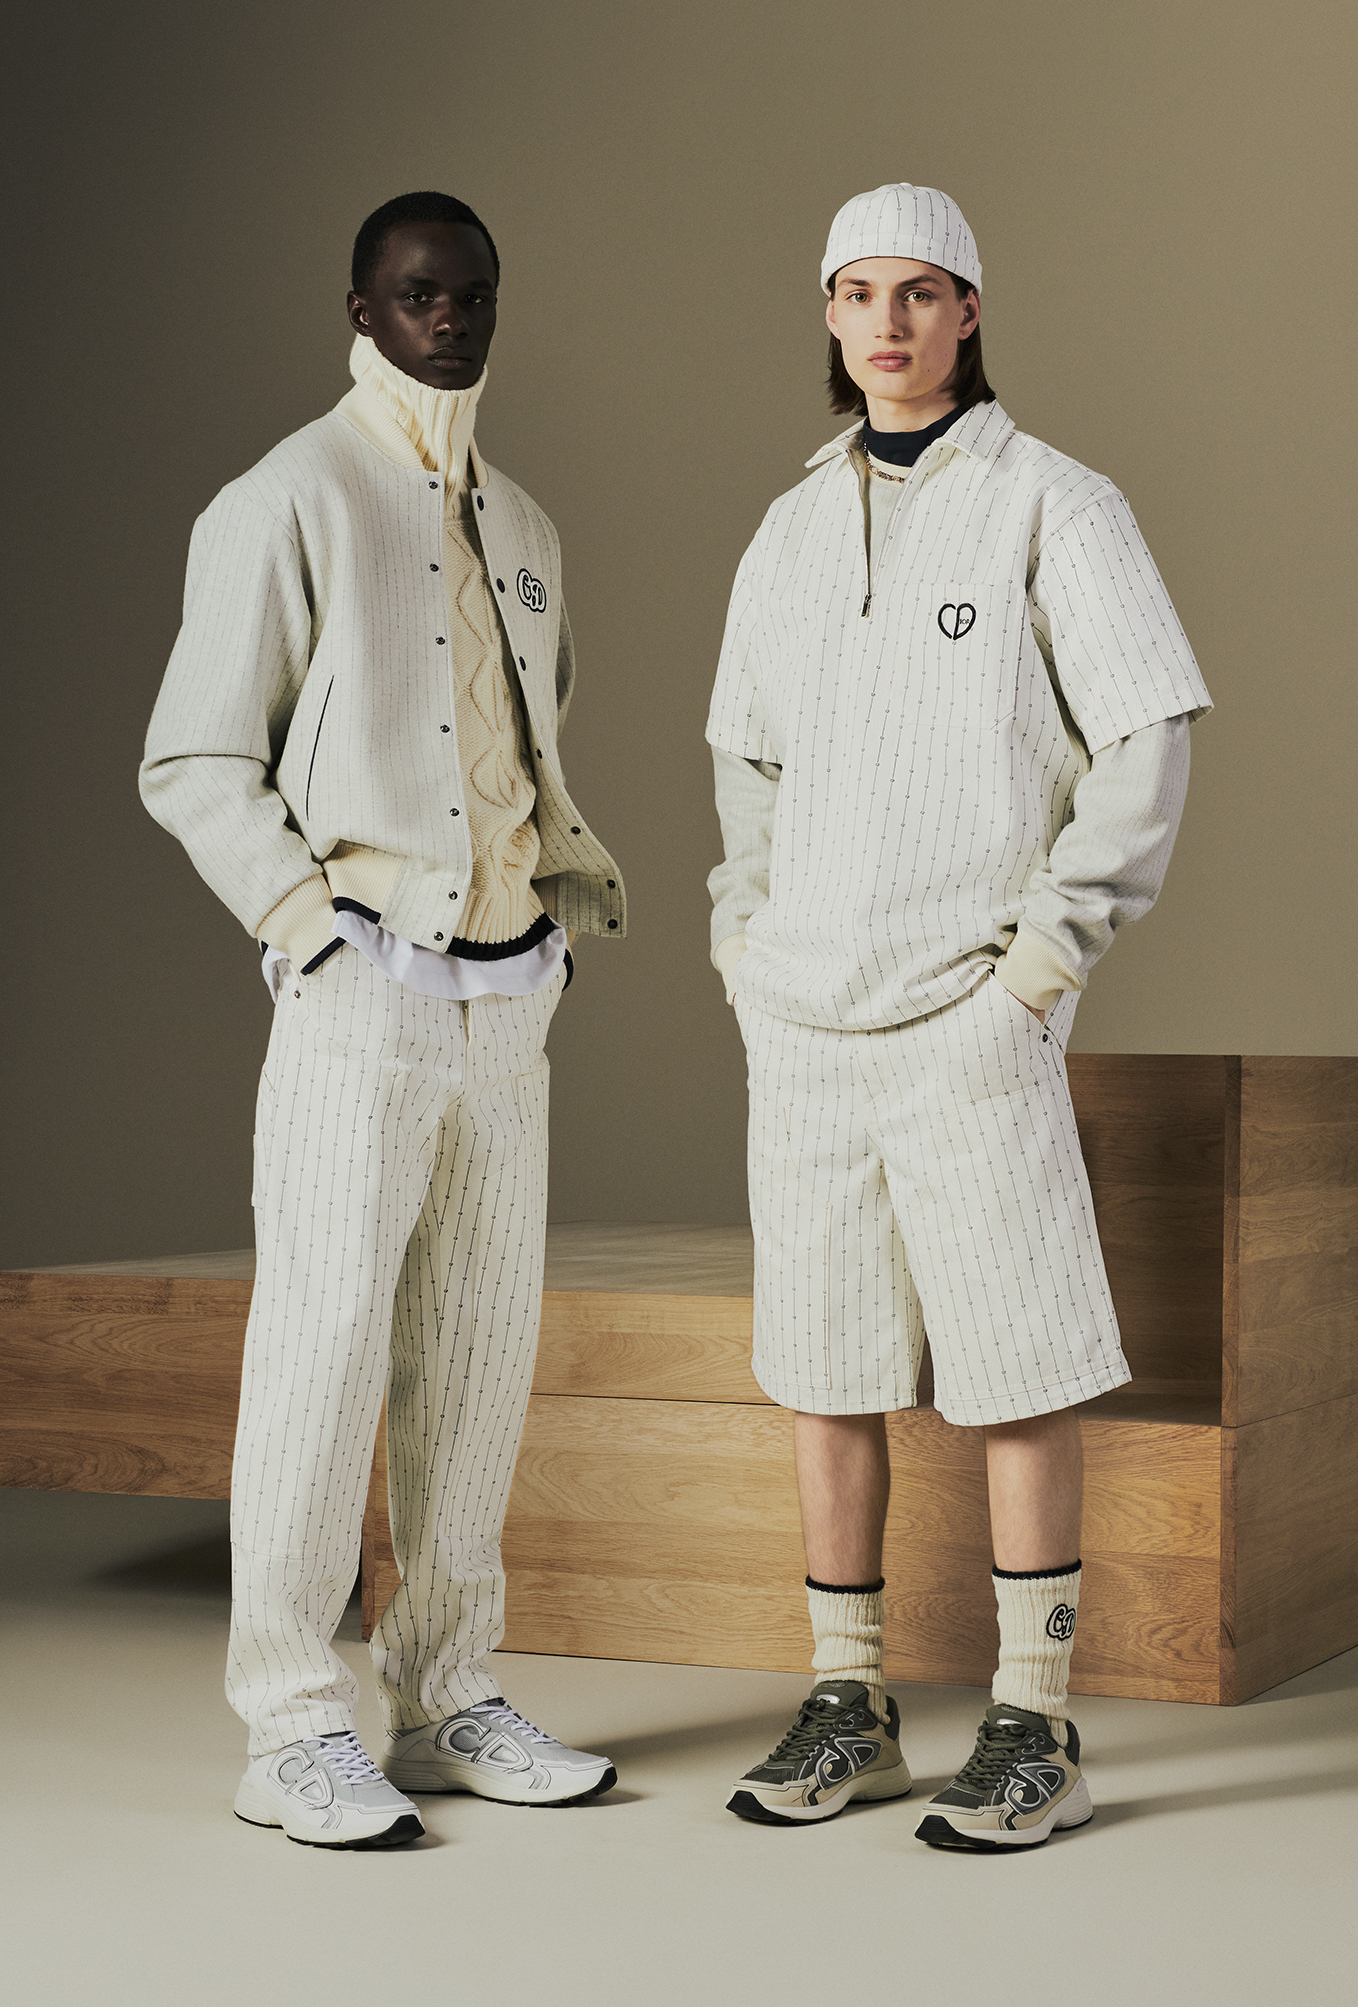 Dior presents its spring 2022 men's collection - The Glass Magazine